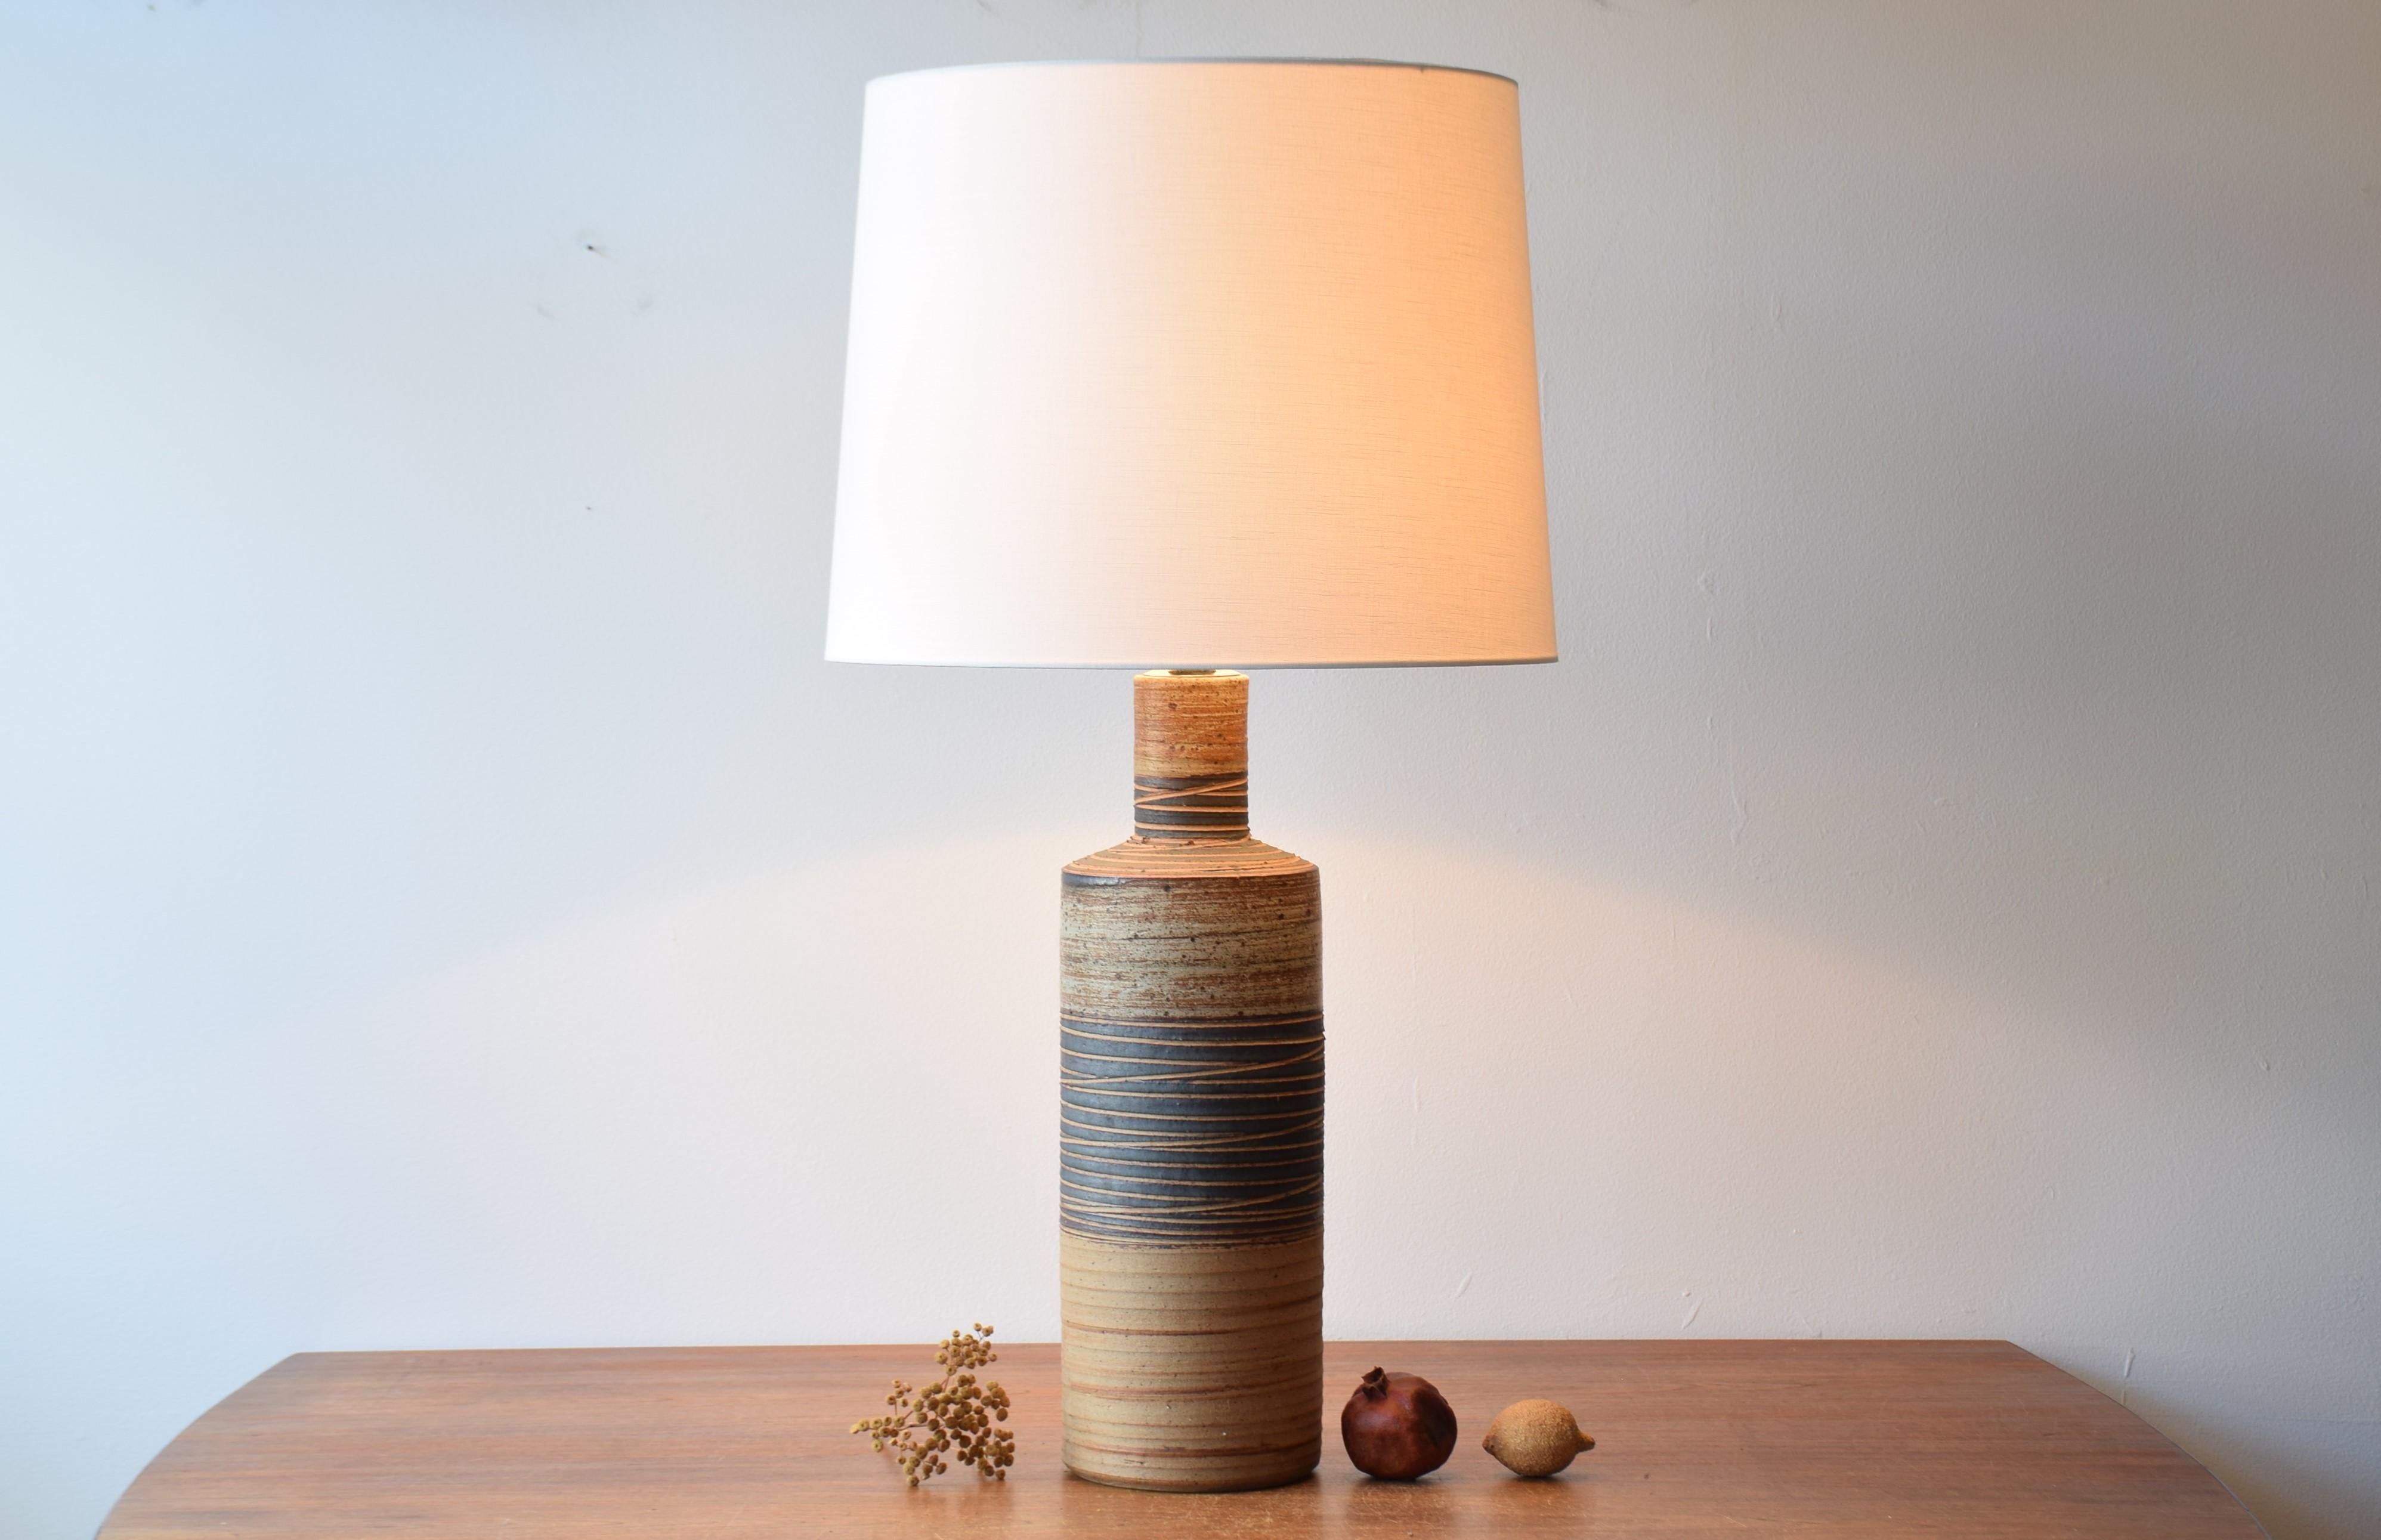 Very tall table lamp including lamp shade by Danish ceramist Tue Poulsen (born 1939). Made ca. 1970s in Tue Poulsen´s own studio.
The base is made of chamotte clay and is decorated with insised stripes and glaze in brown, beige and black and it´s